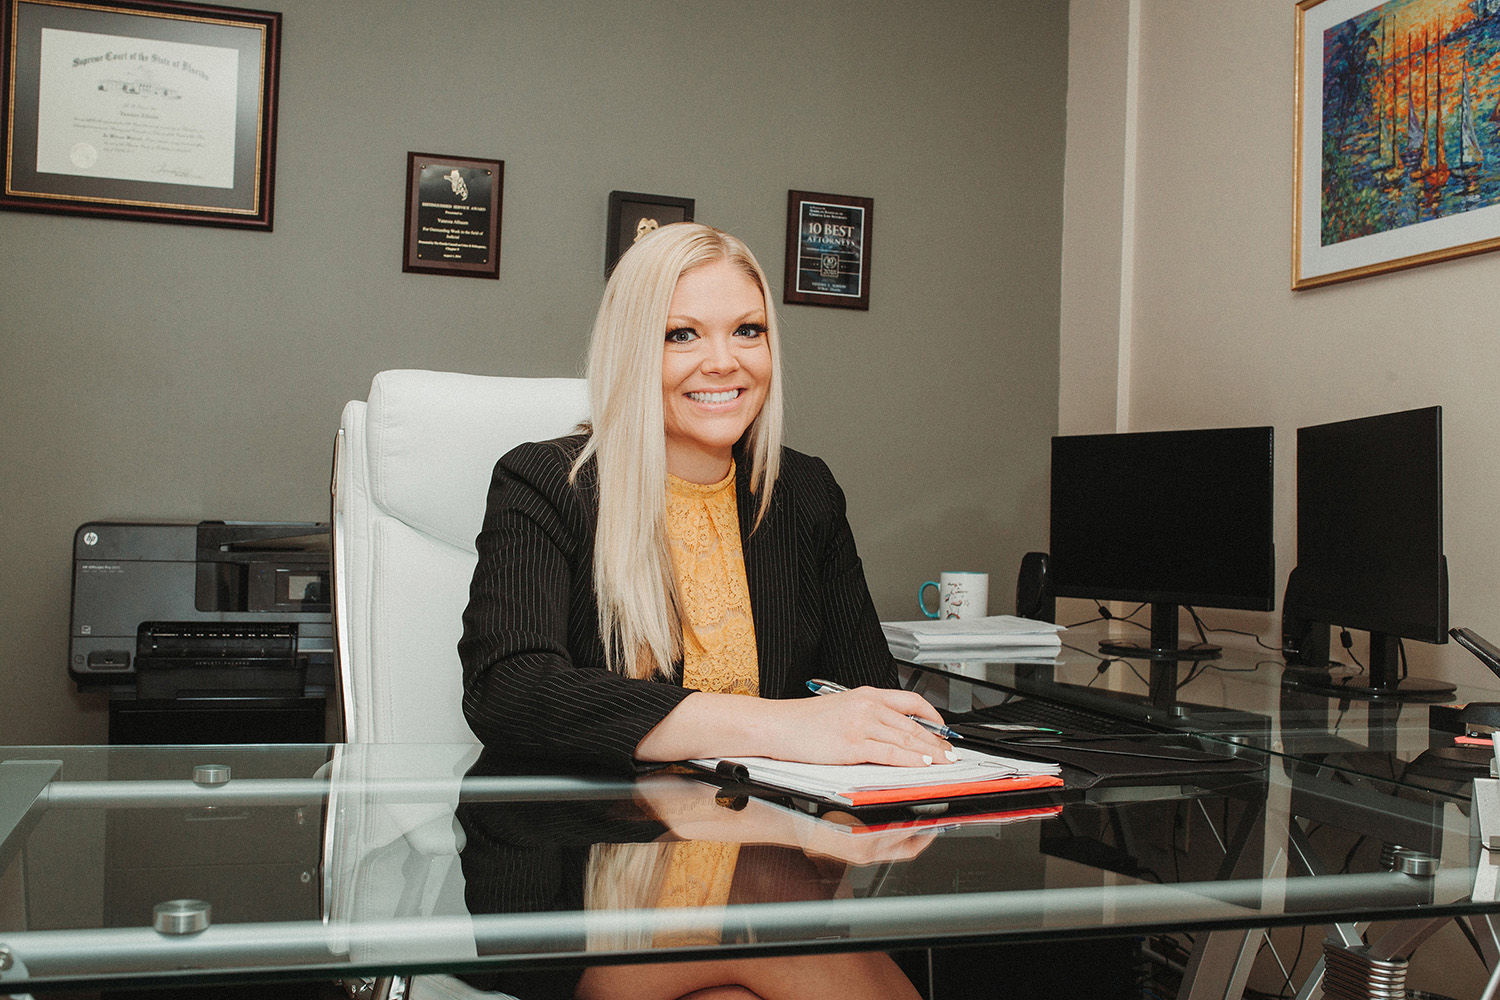 Read more about the article The Importance of Hiring a Criminal Defense Attorney Early in Your Case